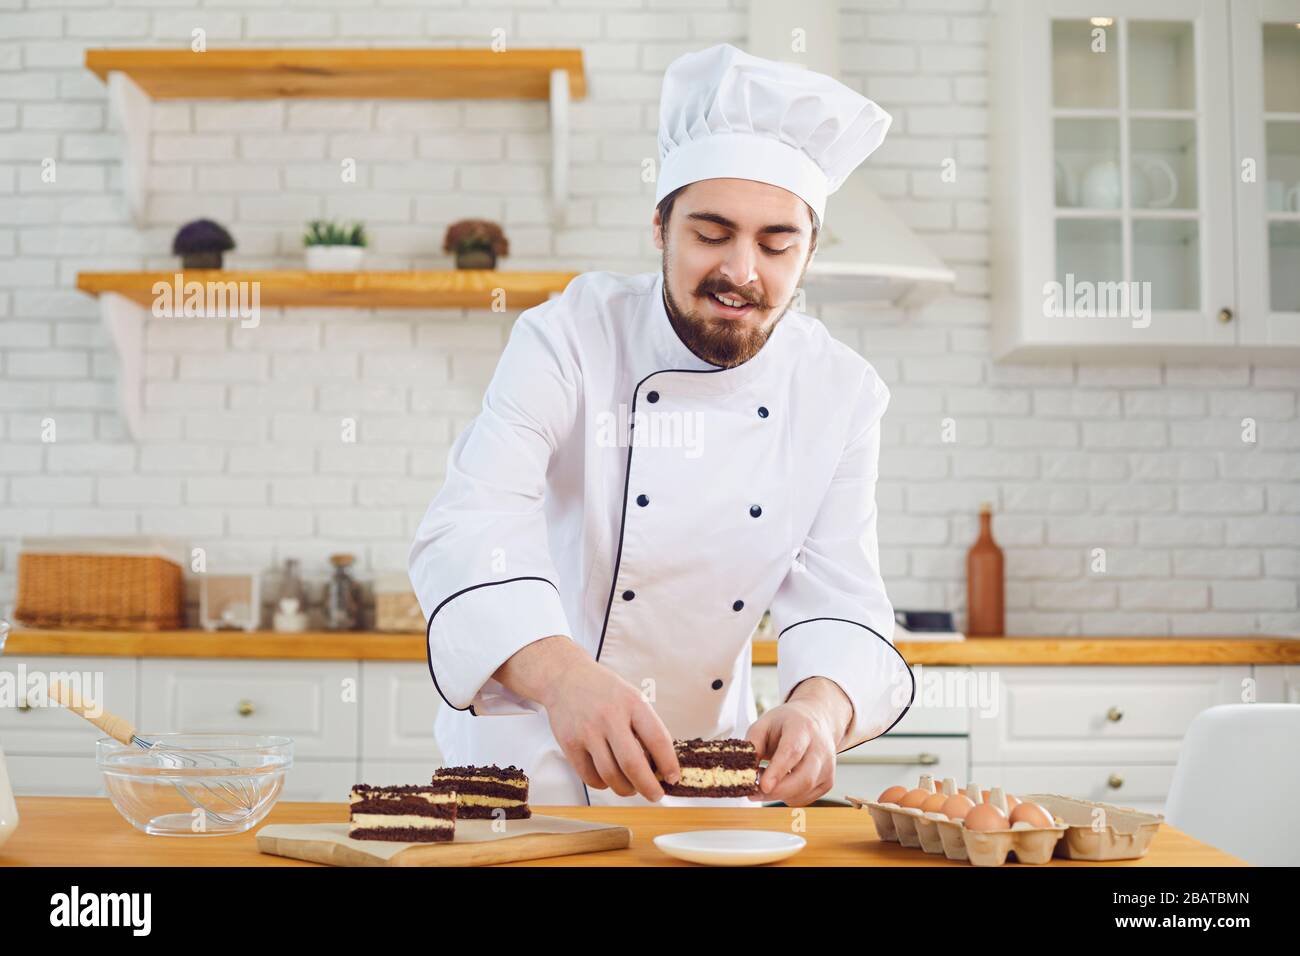 A male pastry chef works decorating a cake on a kitchen bakery Stock Photo